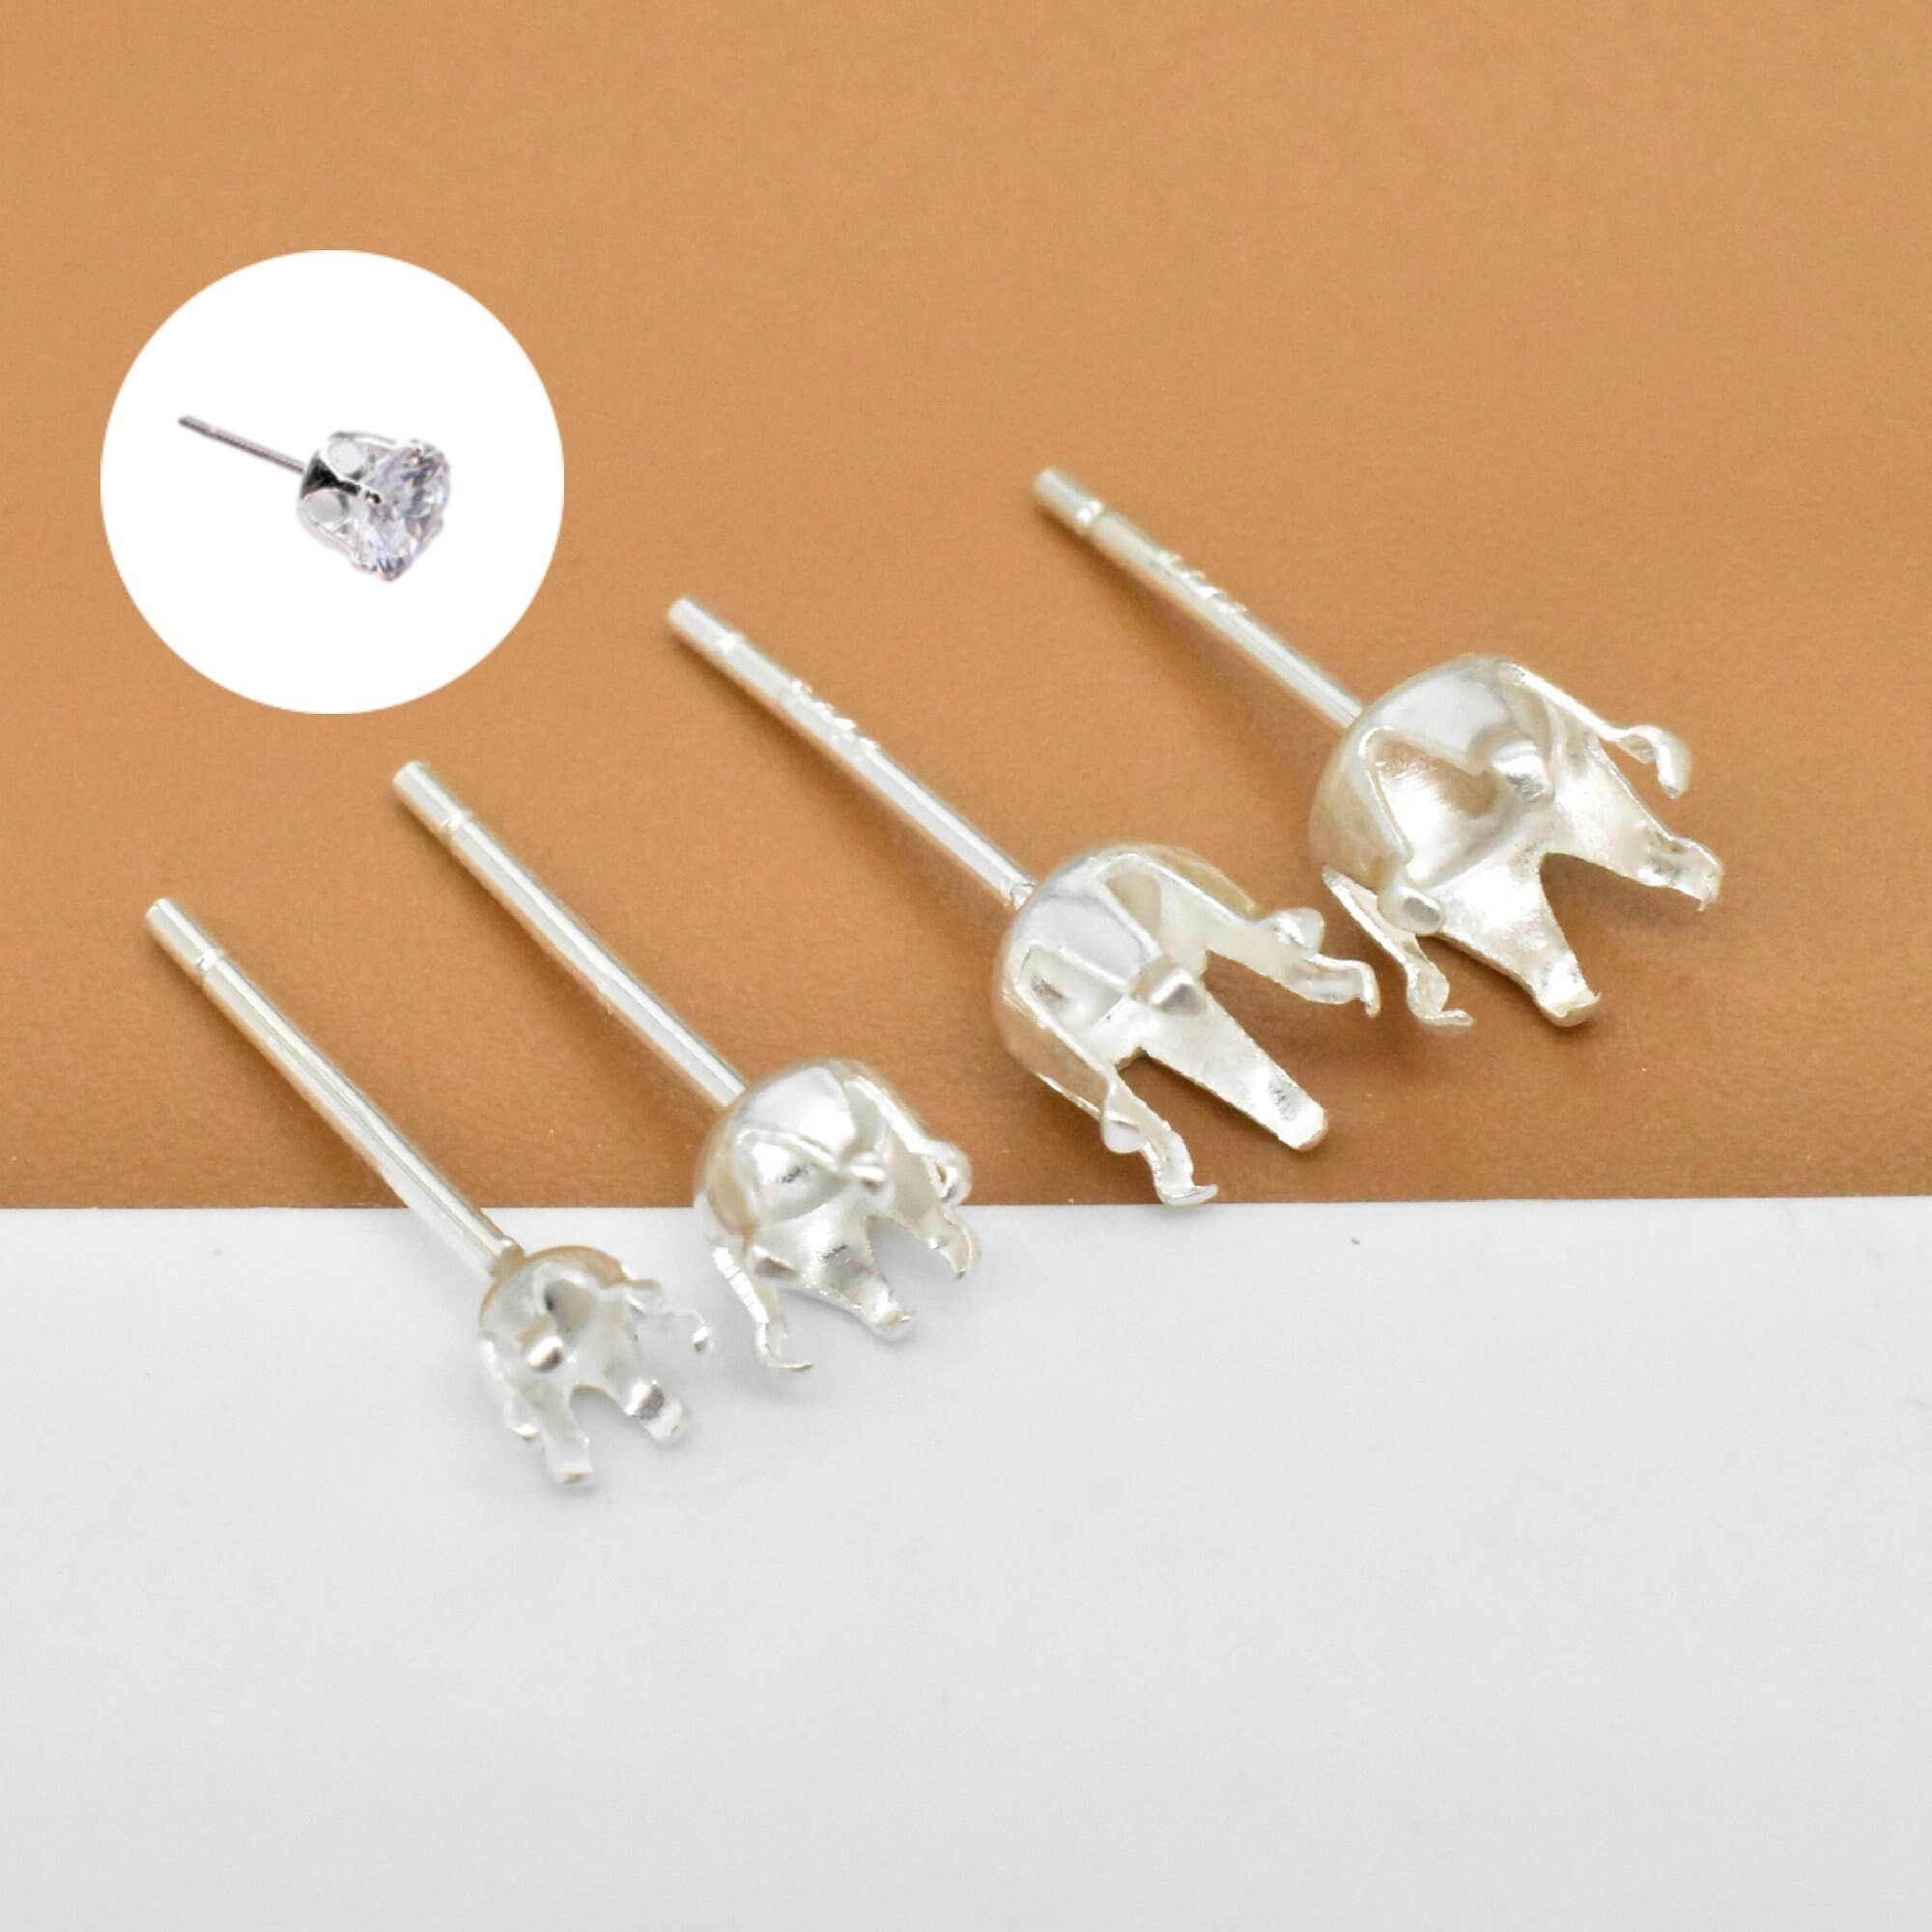 20 Pairs Sterling Silver Earring Posts W/ Flat Back 1.5mm 2mm 3mm 4mm 5mm  6mm 7mm 8mm, 925 Silver Earring Post Ear Stud W/ Stopper, Flat Pad 